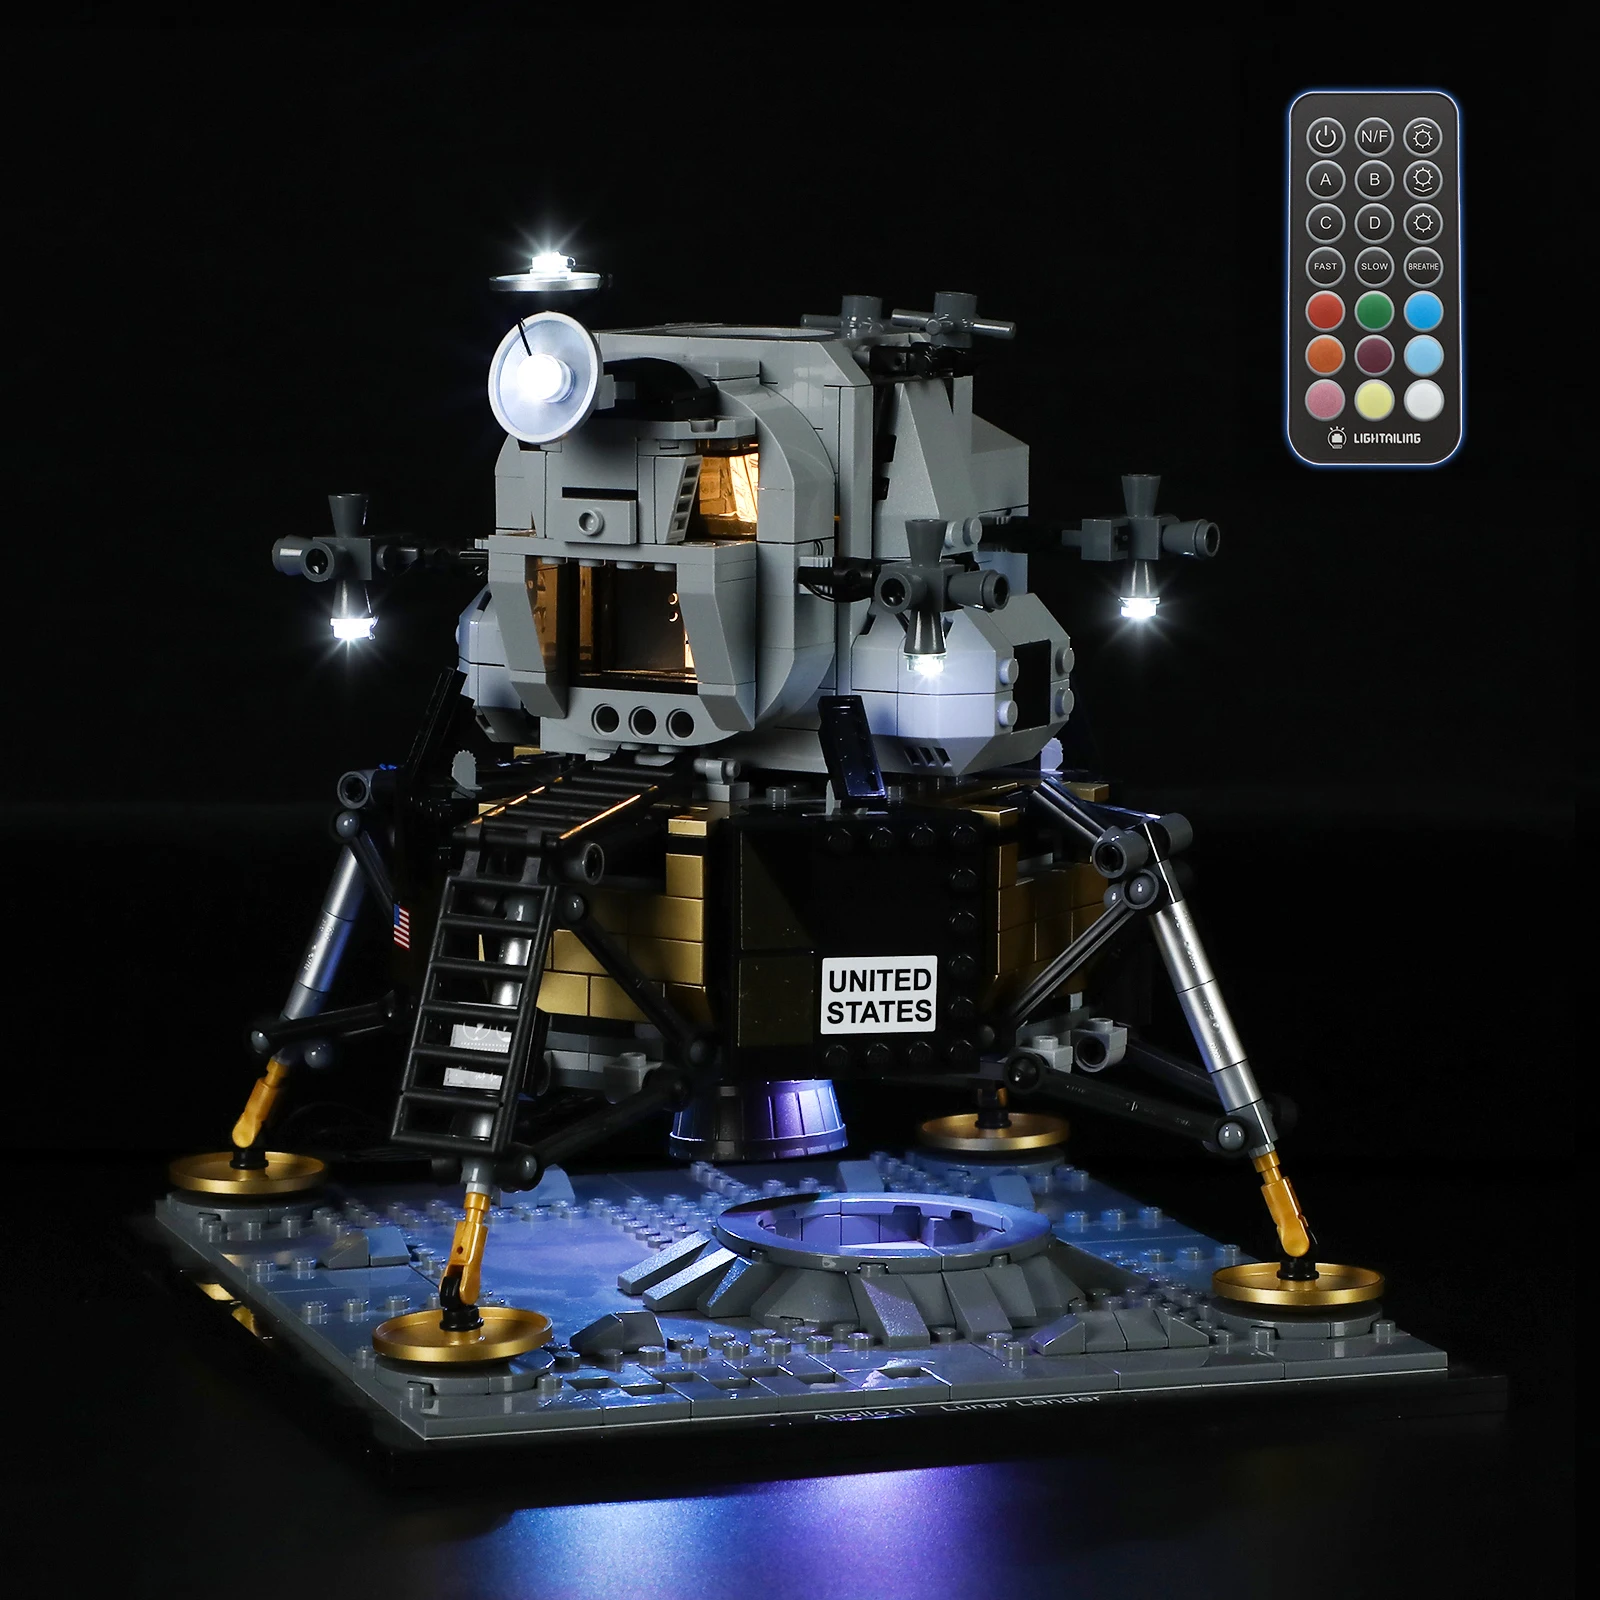 

JOY MAGS Led Light Kit for 10266 Apollo 11 Lunar Lander Remote Control Version (NOT Include Model)